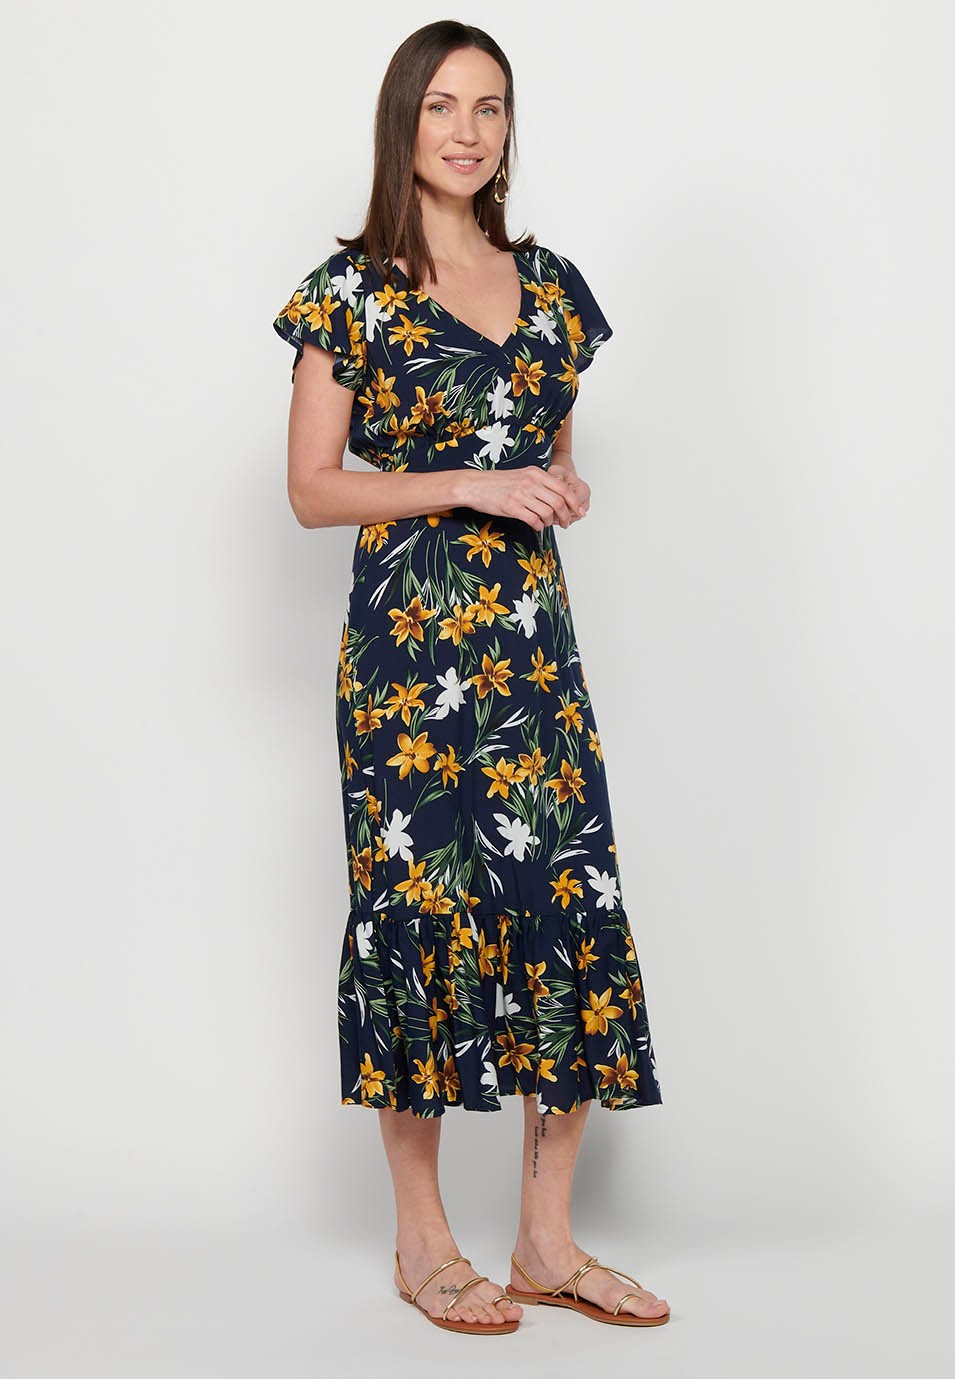 Long short-sleeved dress with V-neck and floral print in Navy for Women 8